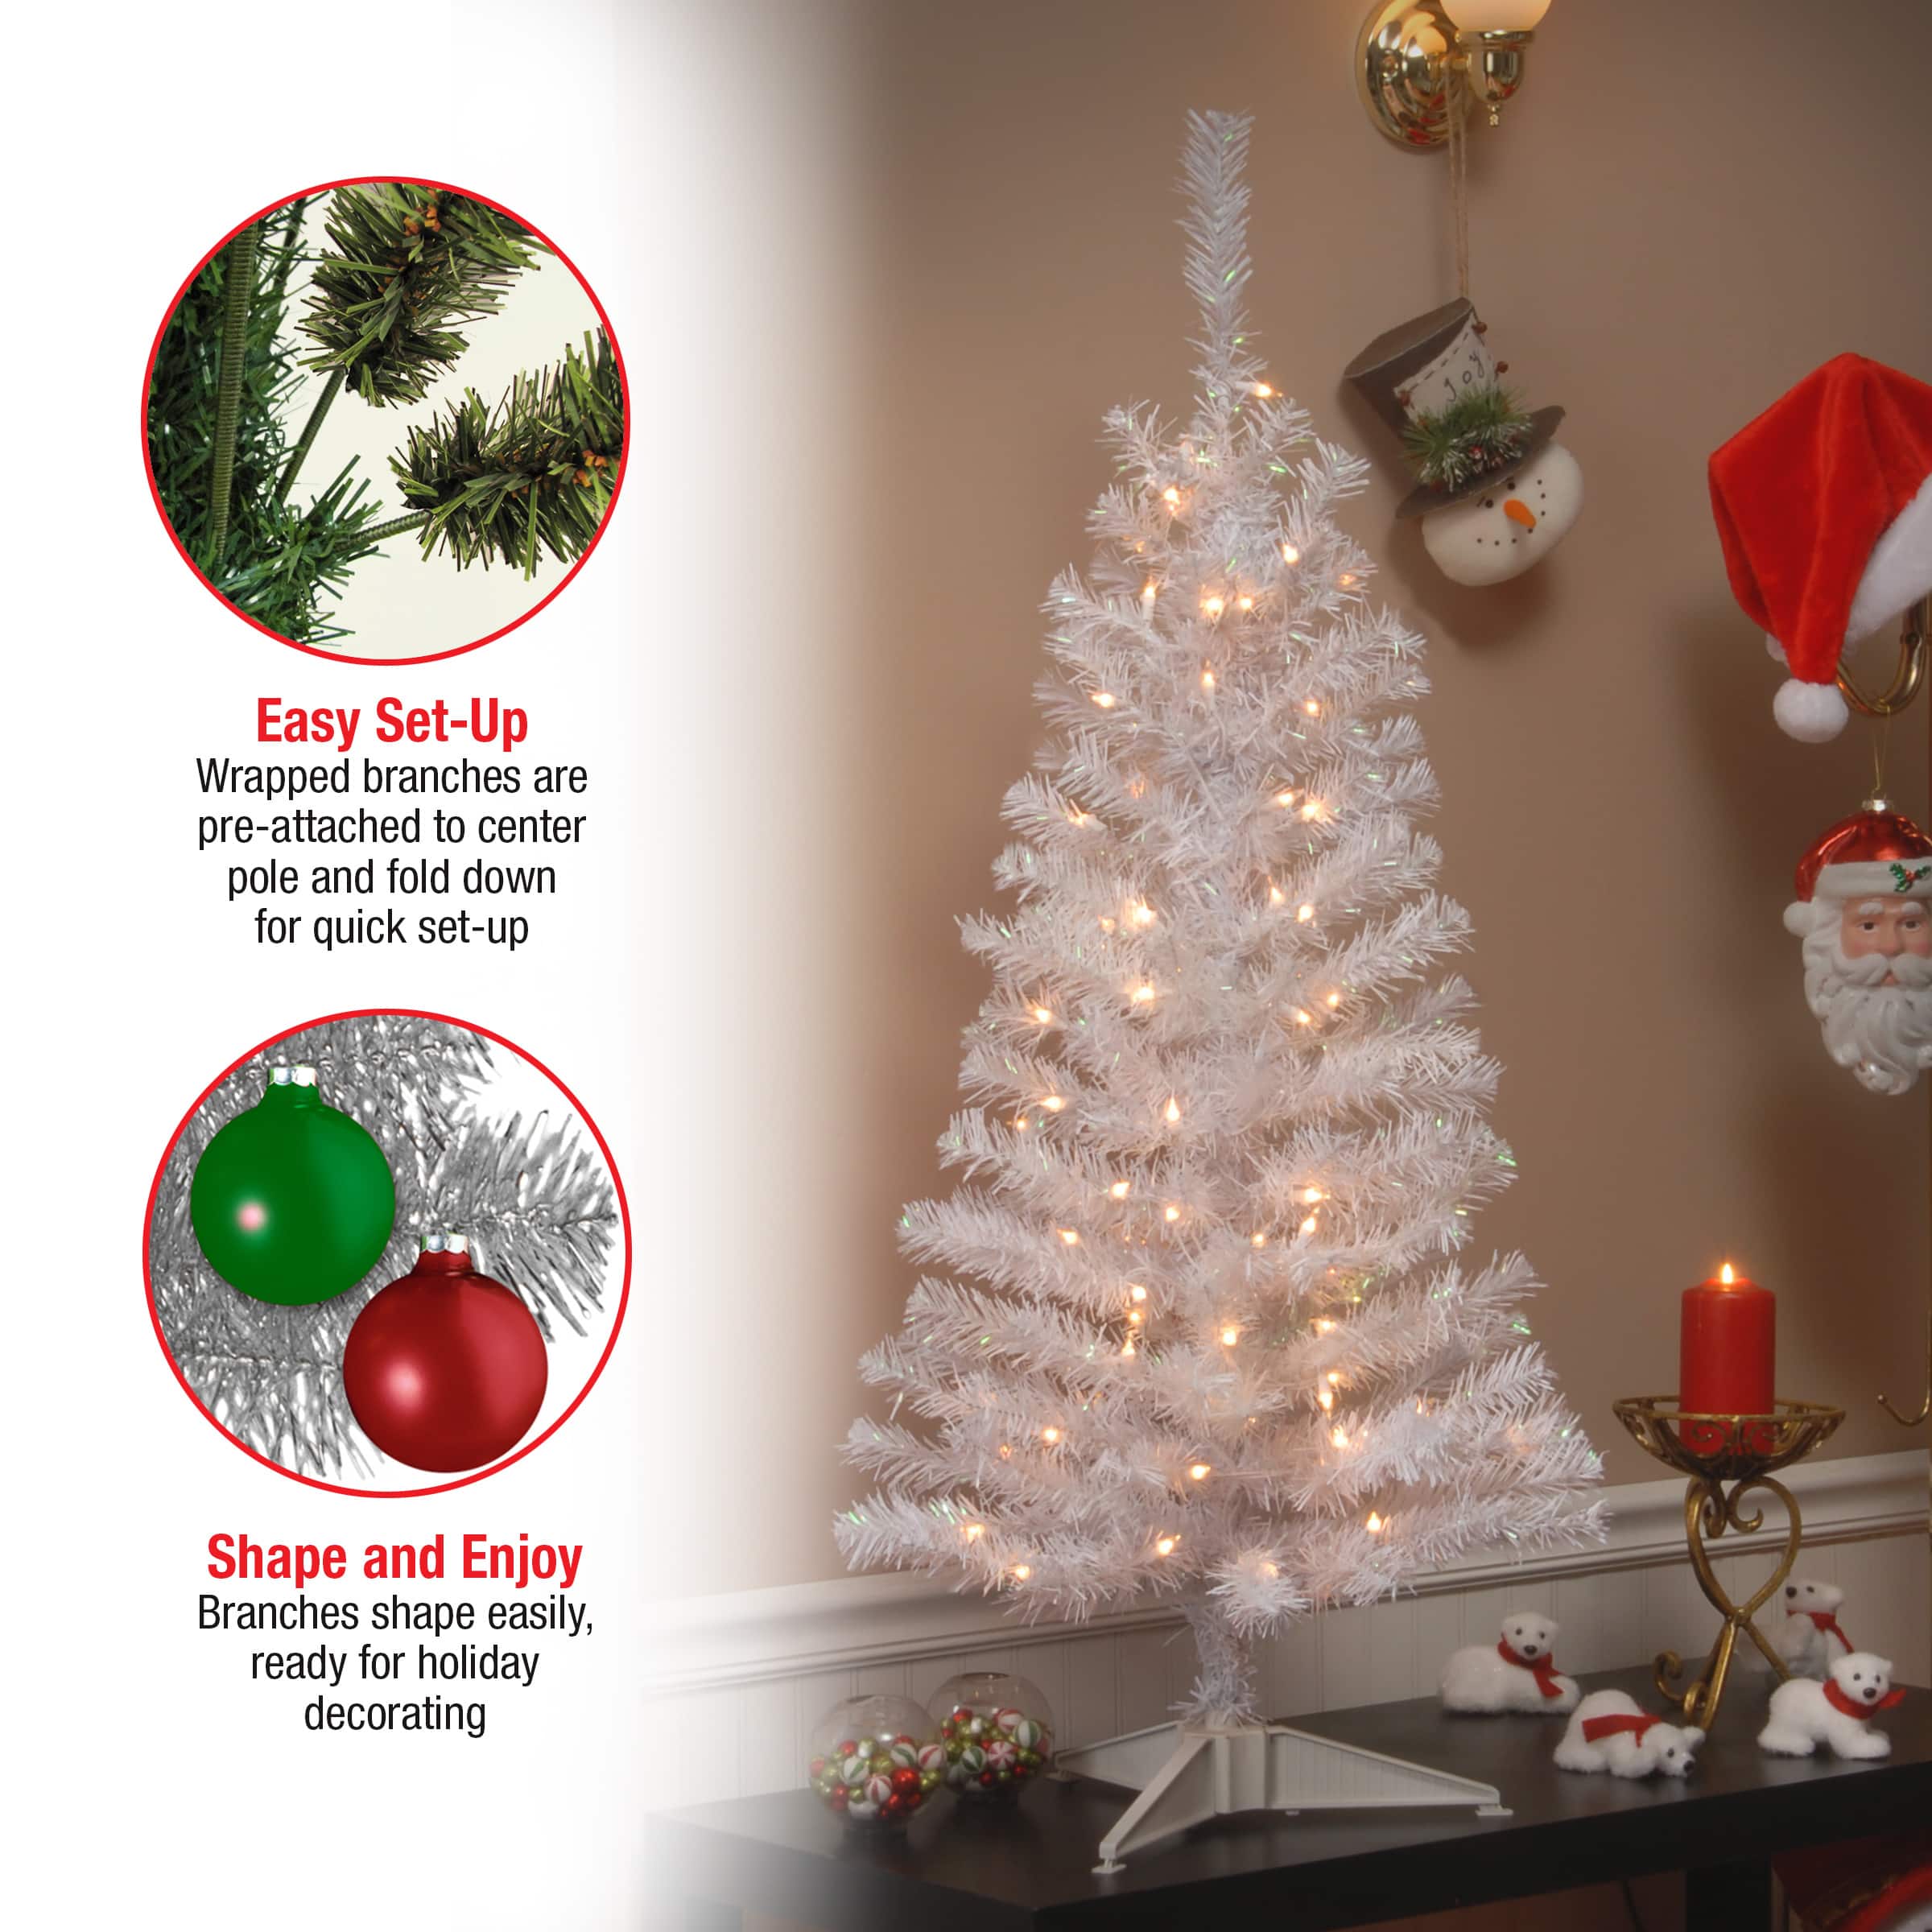 4ft. Pre-Lit White Iridescent Tinsel Artificial Christmas Tree, Clear Lights